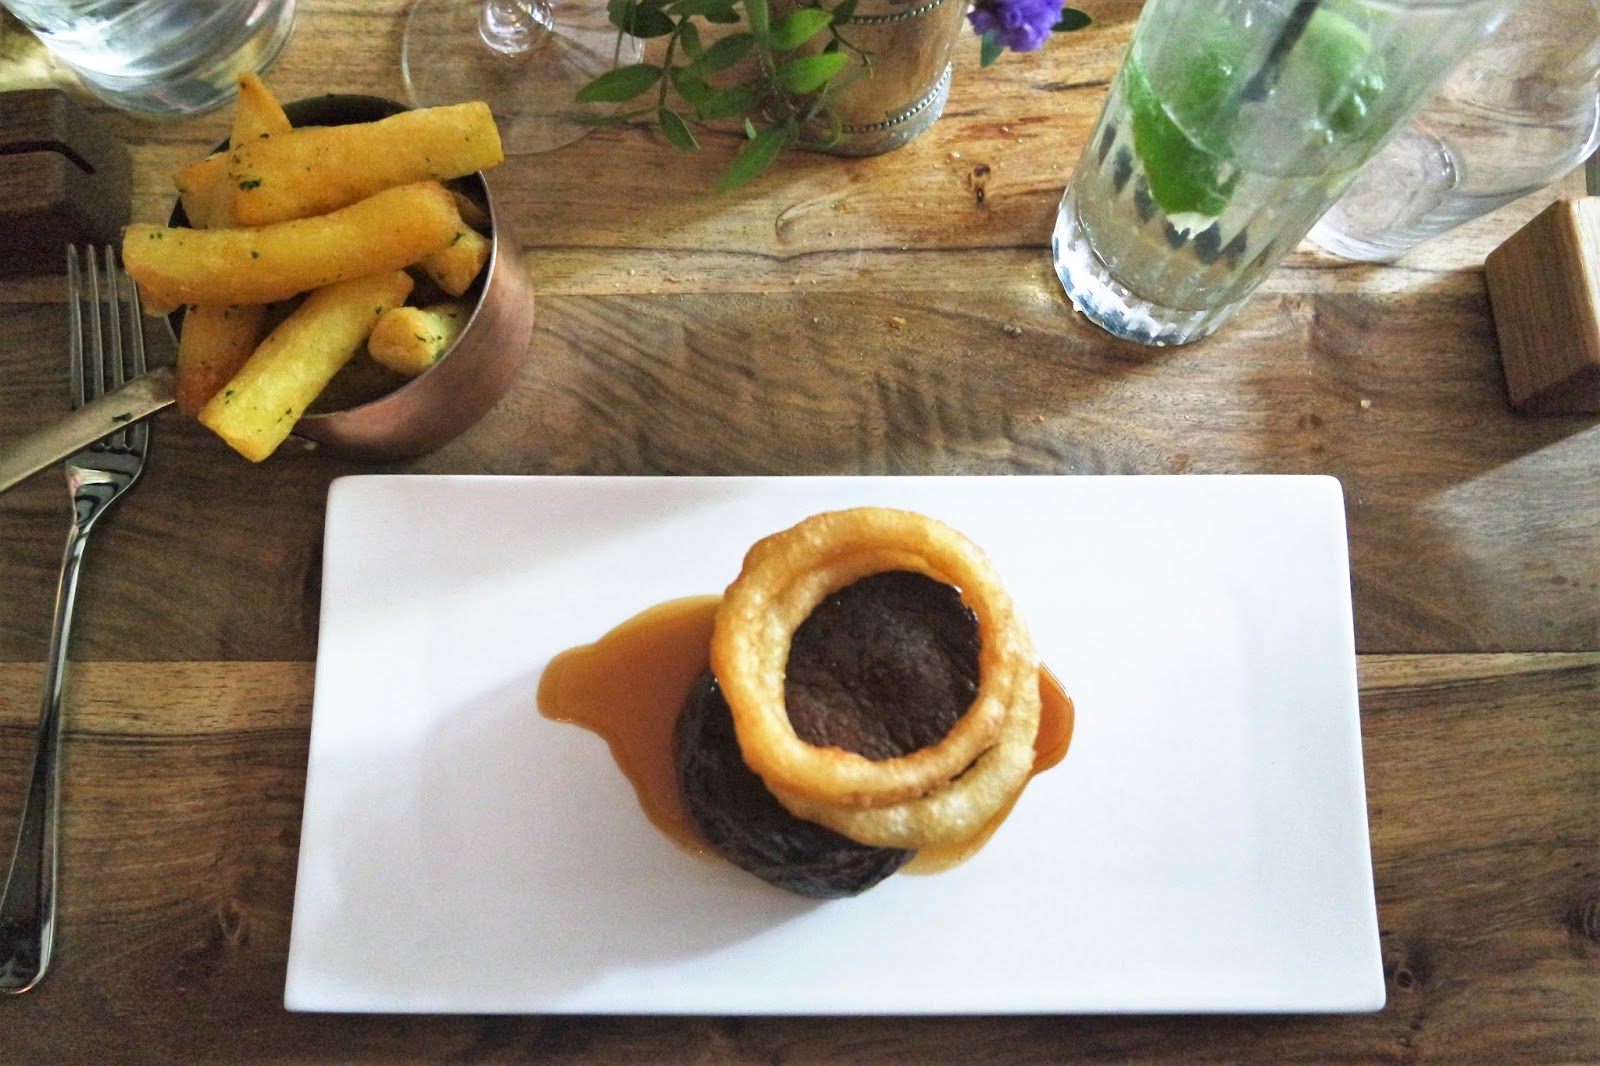 Tom Kerridge Hand and Flowers Beef Fillet and Chips